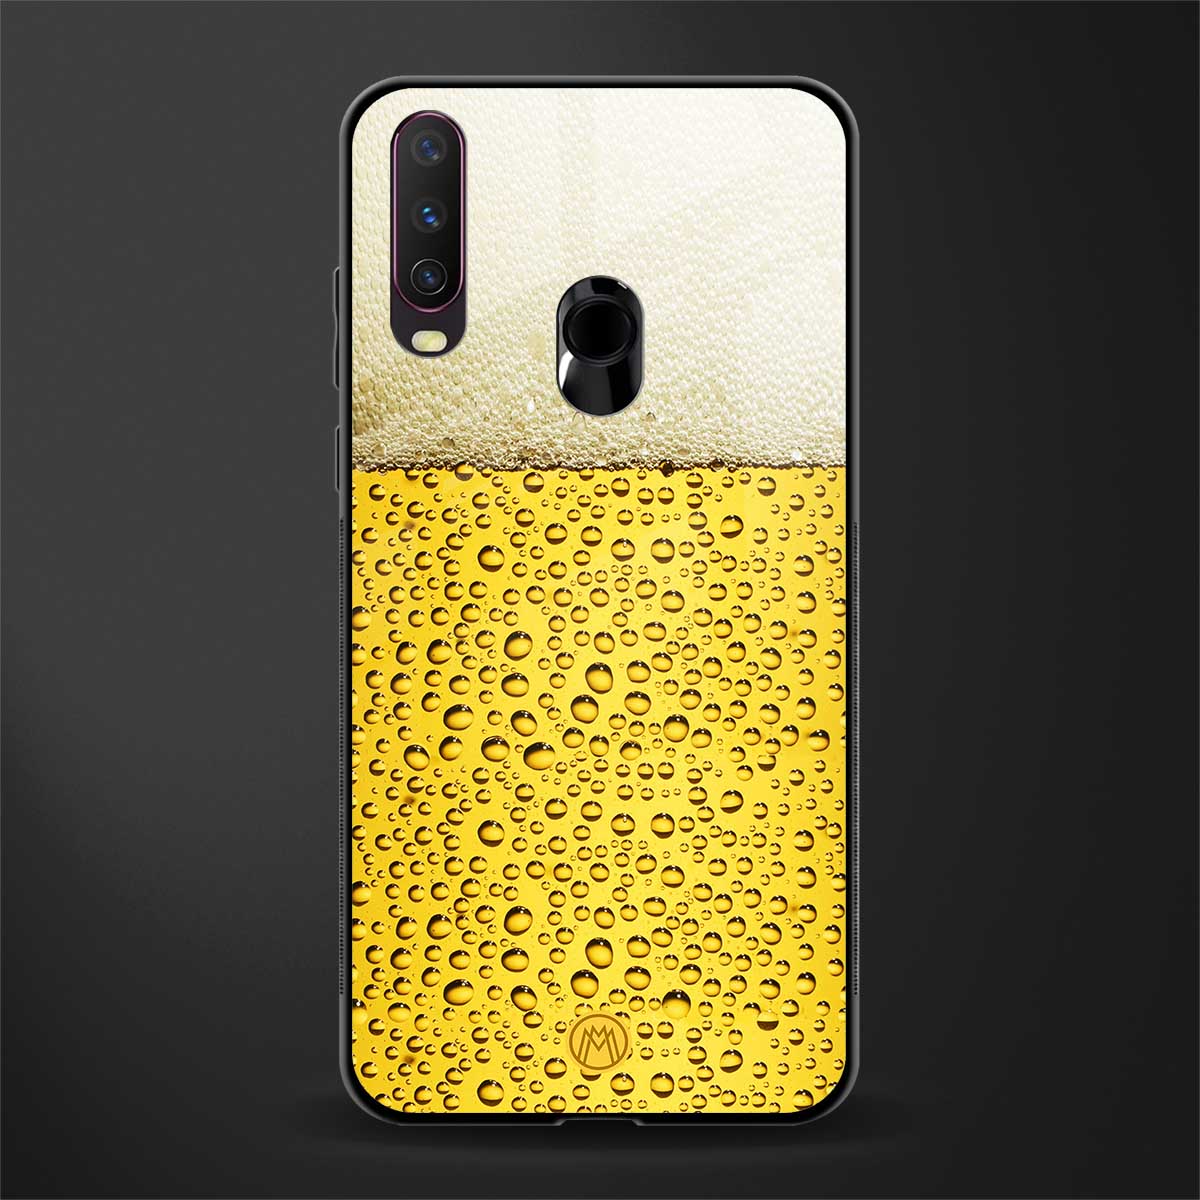 fizzy beer glass case for vivo y12 image